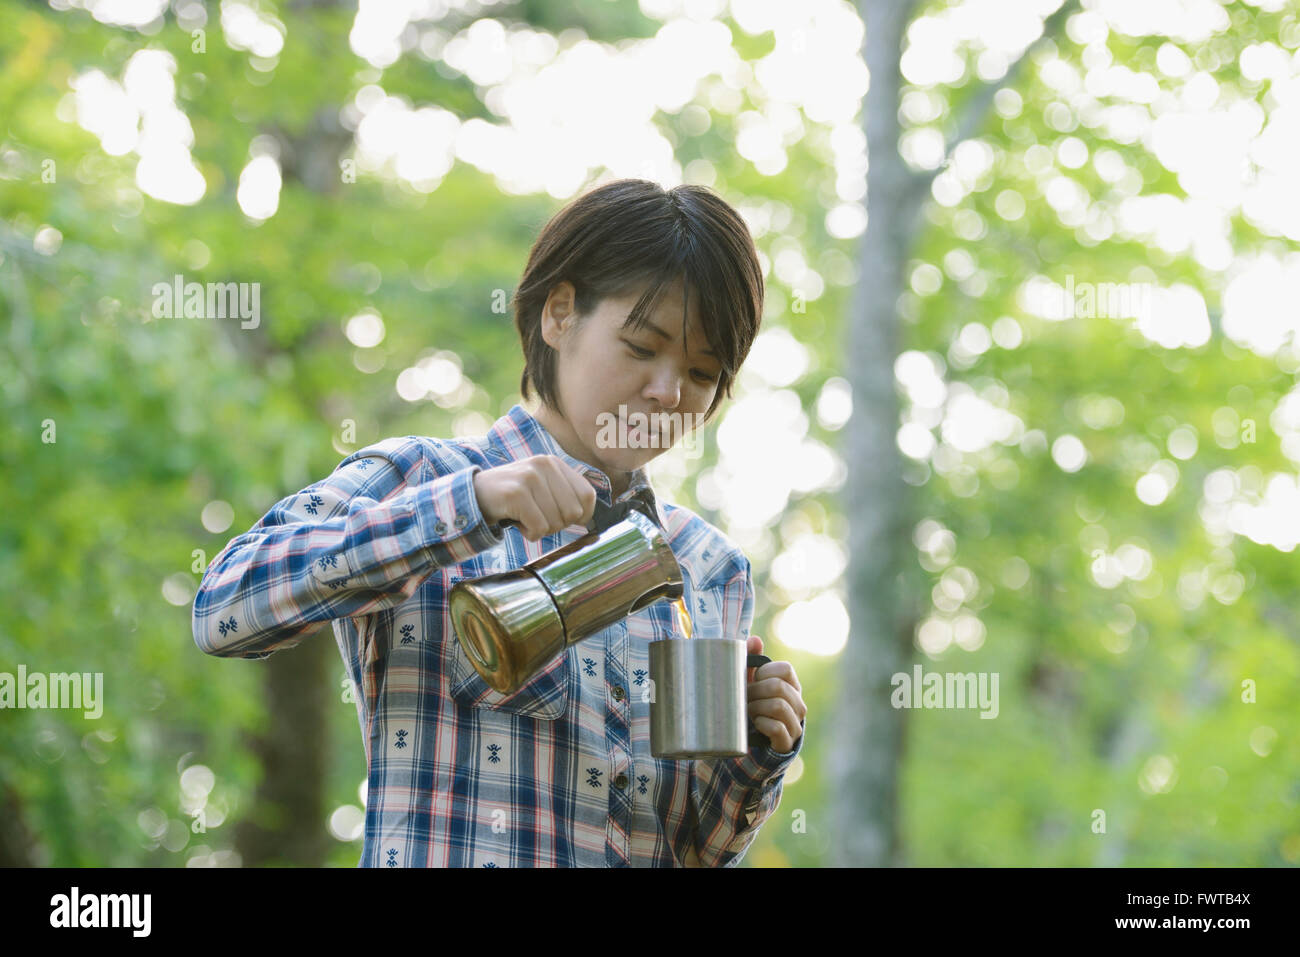 https://c8.alamy.com/comp/FWTB4X/young-japanese-woman-drinking-coffee-at-a-camp-site-FWTB4X.jpg